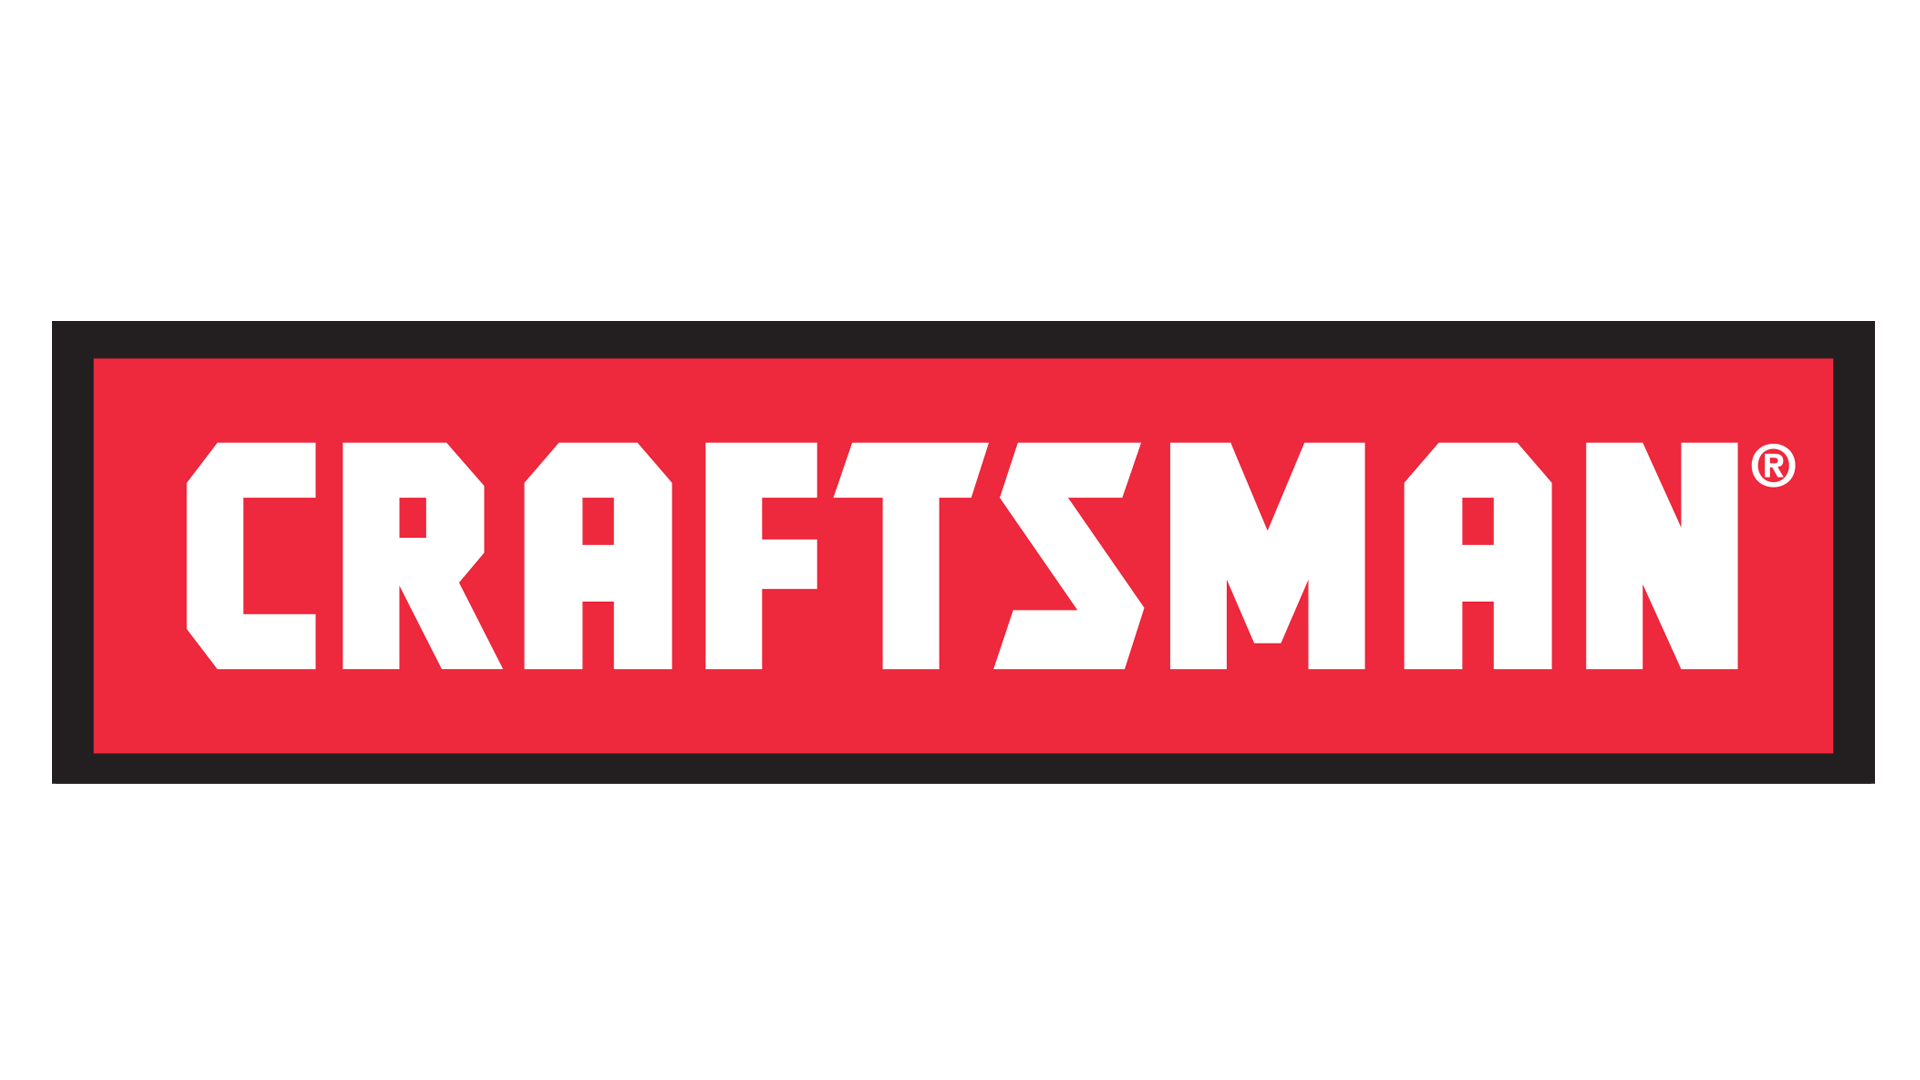 Craftsman residential garage door opener sales and repair service in Montreal, Montreal-West, Montreal-East, Laval and on the North Shore and surrounding areas - Montreal Garage Doors - Portes de Garage Supérieur Inc. located at city  Saint-Laurent in Montreal